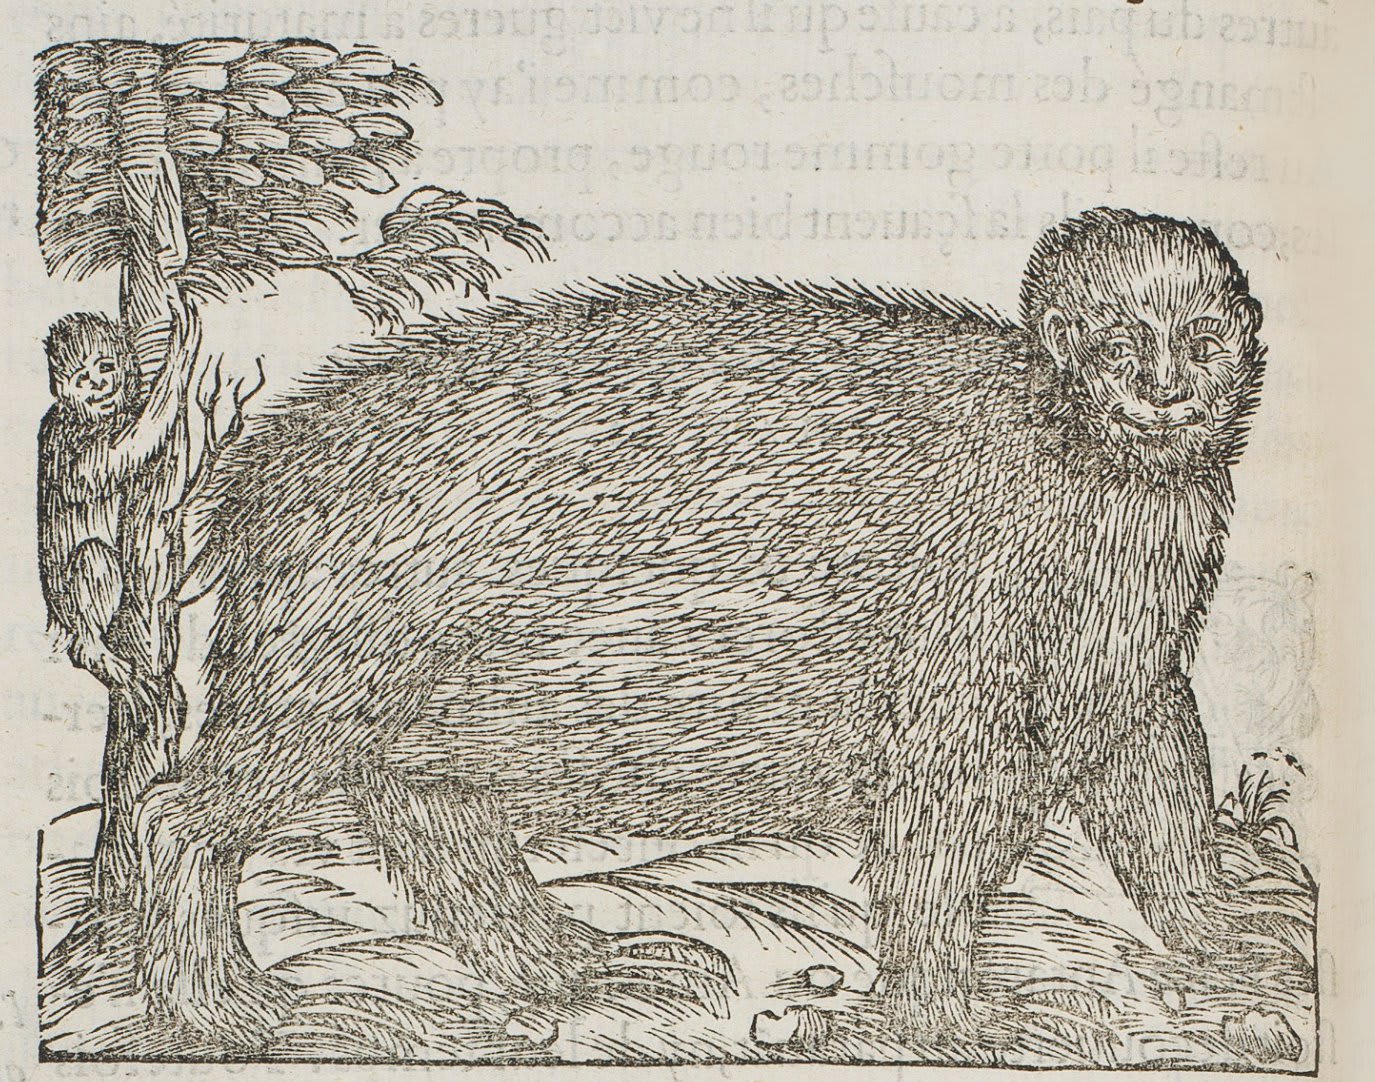 The Strange Nature of the First Printed Illustration of a Sloth